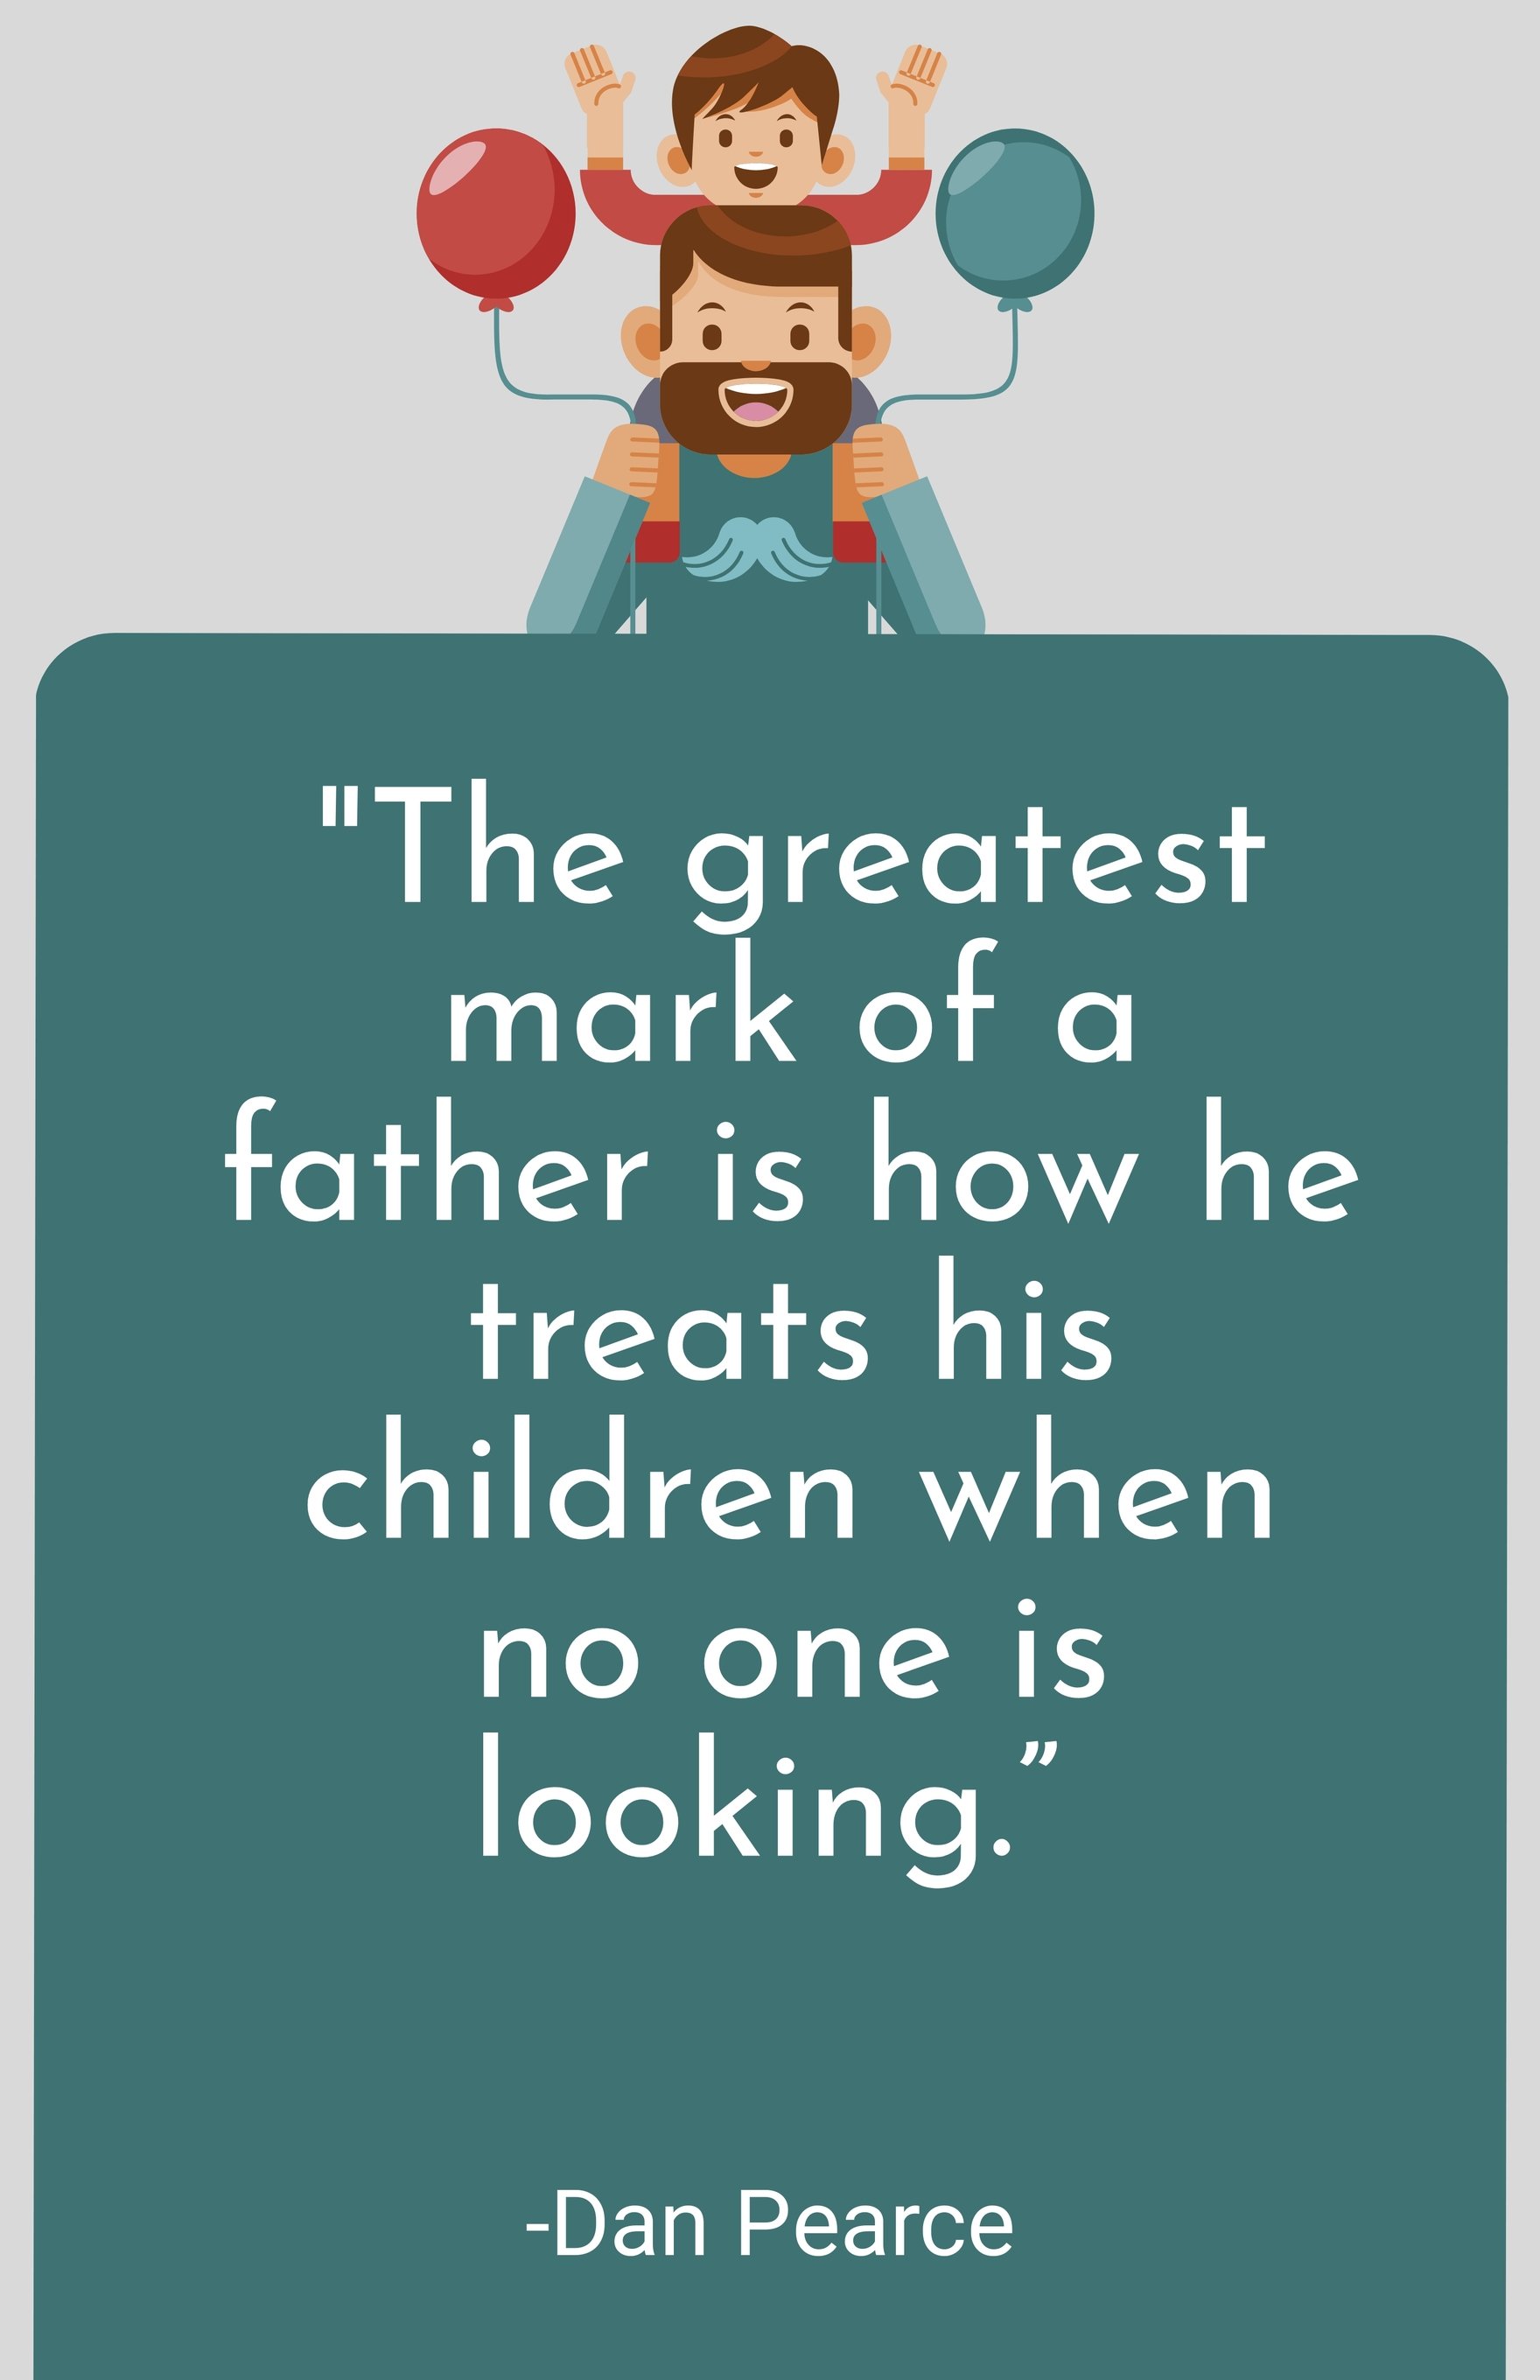 Free Dan Pearce-"The greatest mark of a father is how he treats his children when no one is looking.”  in JPG